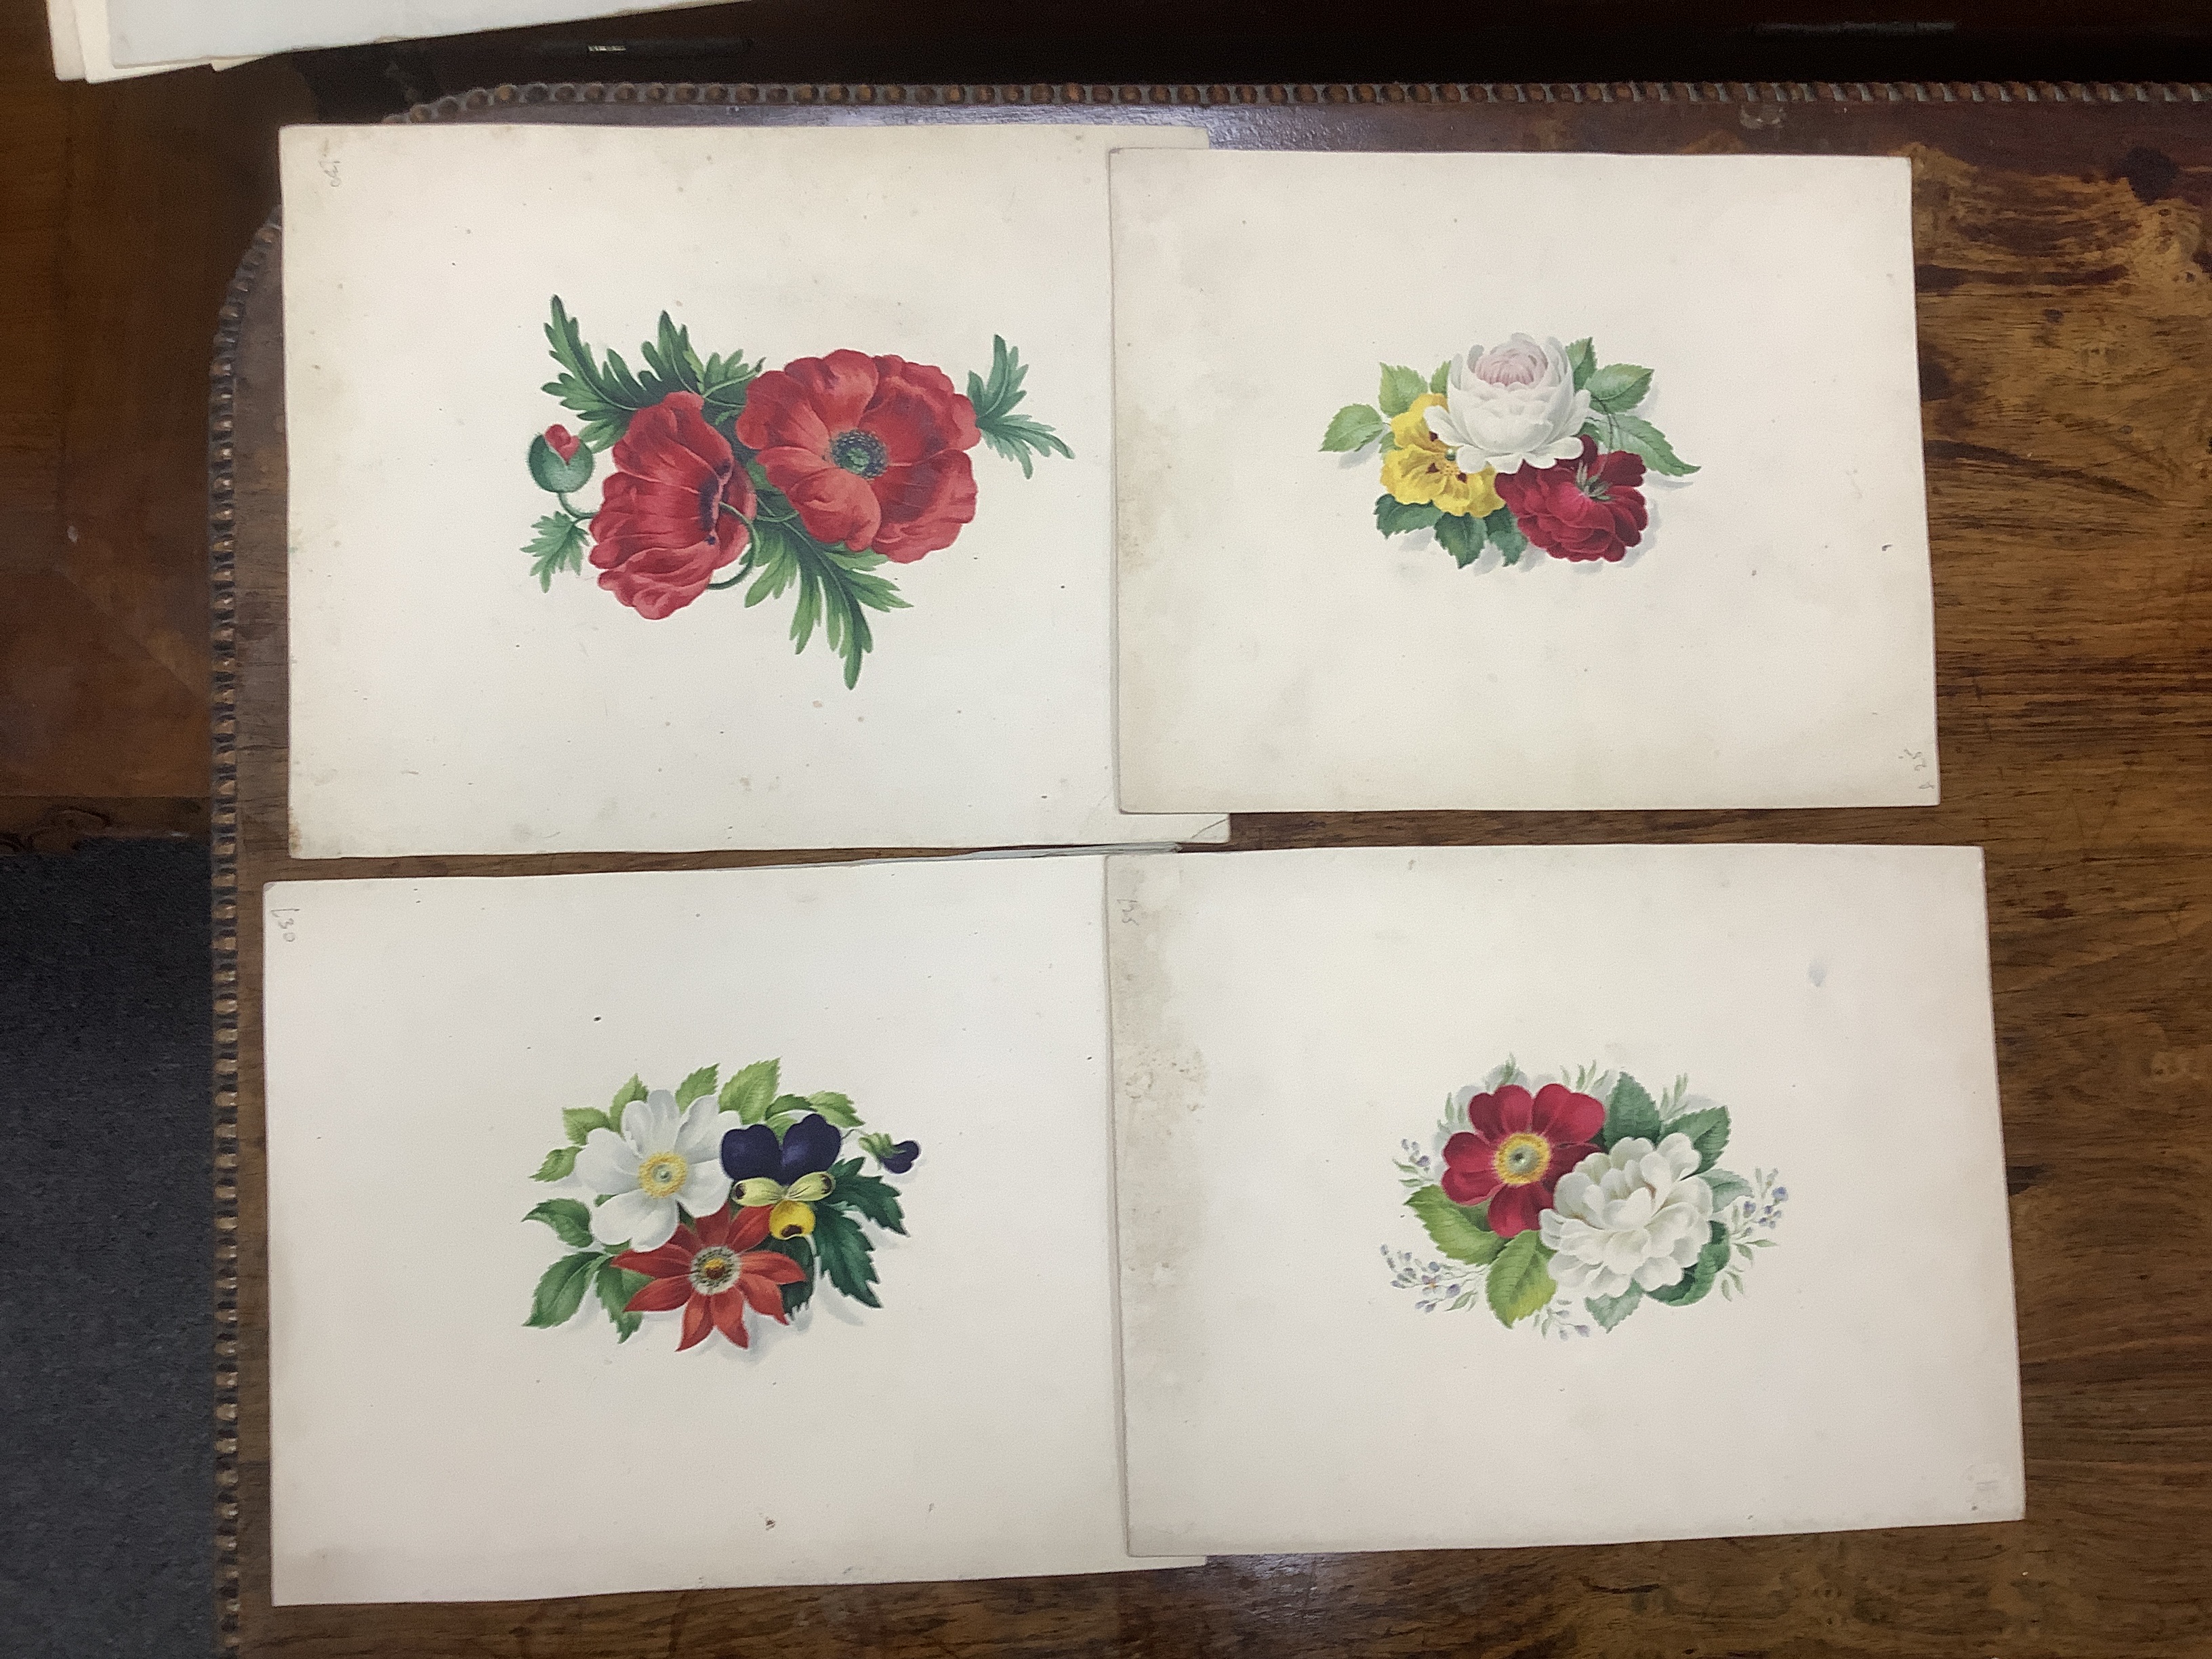 A collection of 19th century botanical watercolour studies on paper, one indistinctly signed and inscribed Manchester in ink, largest 34 x 26cm, unframed, housed in a tooled leather wallet